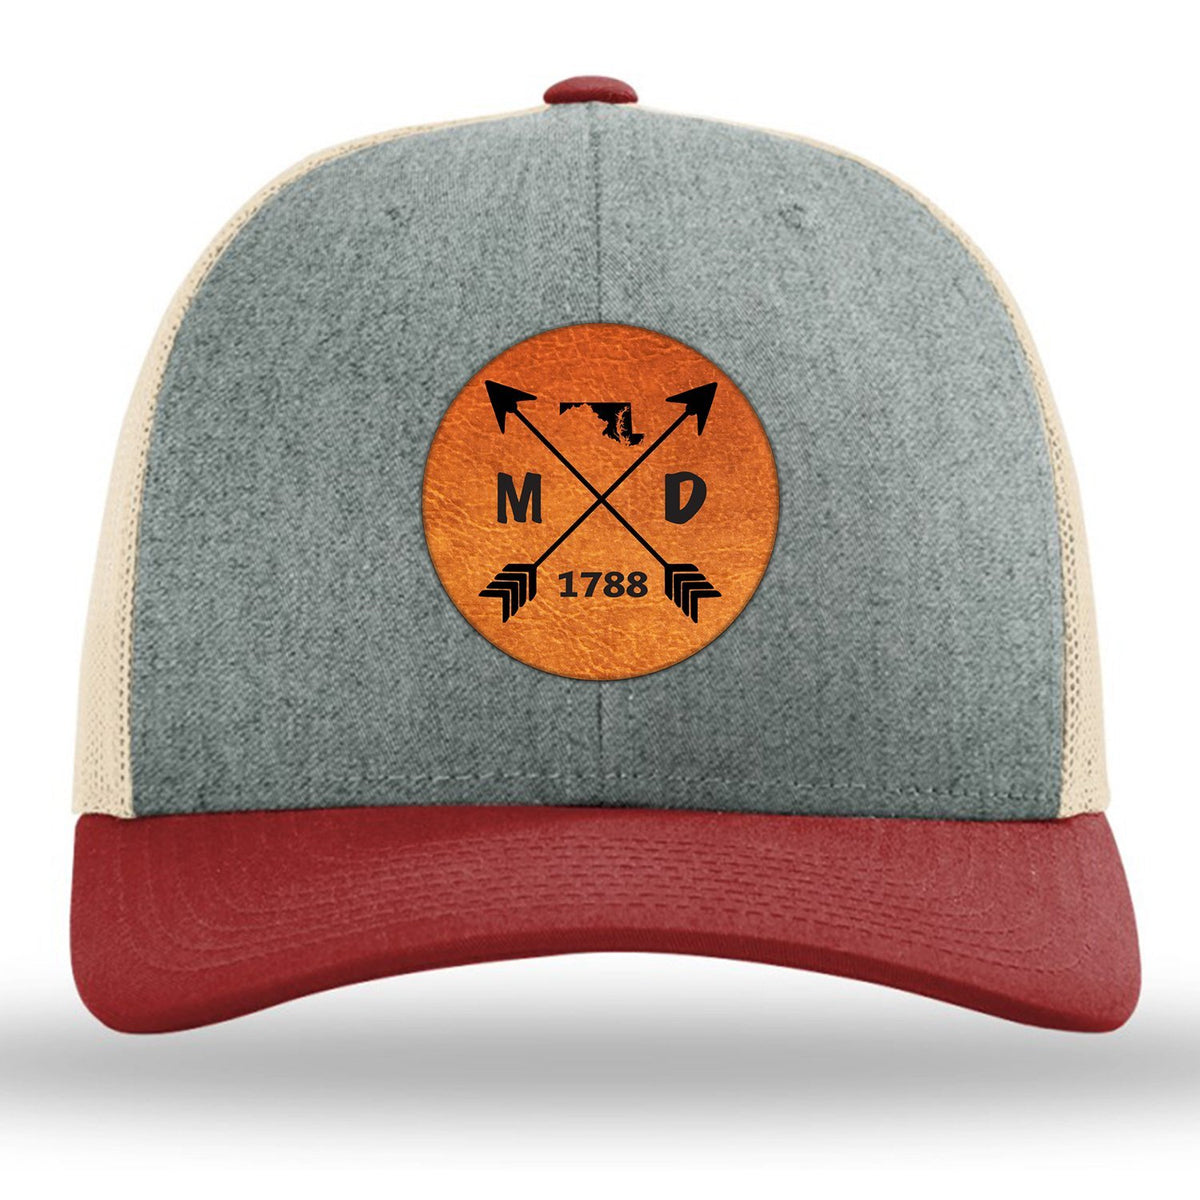 Maryland State Arrows - Leather Patch Trucker Hat